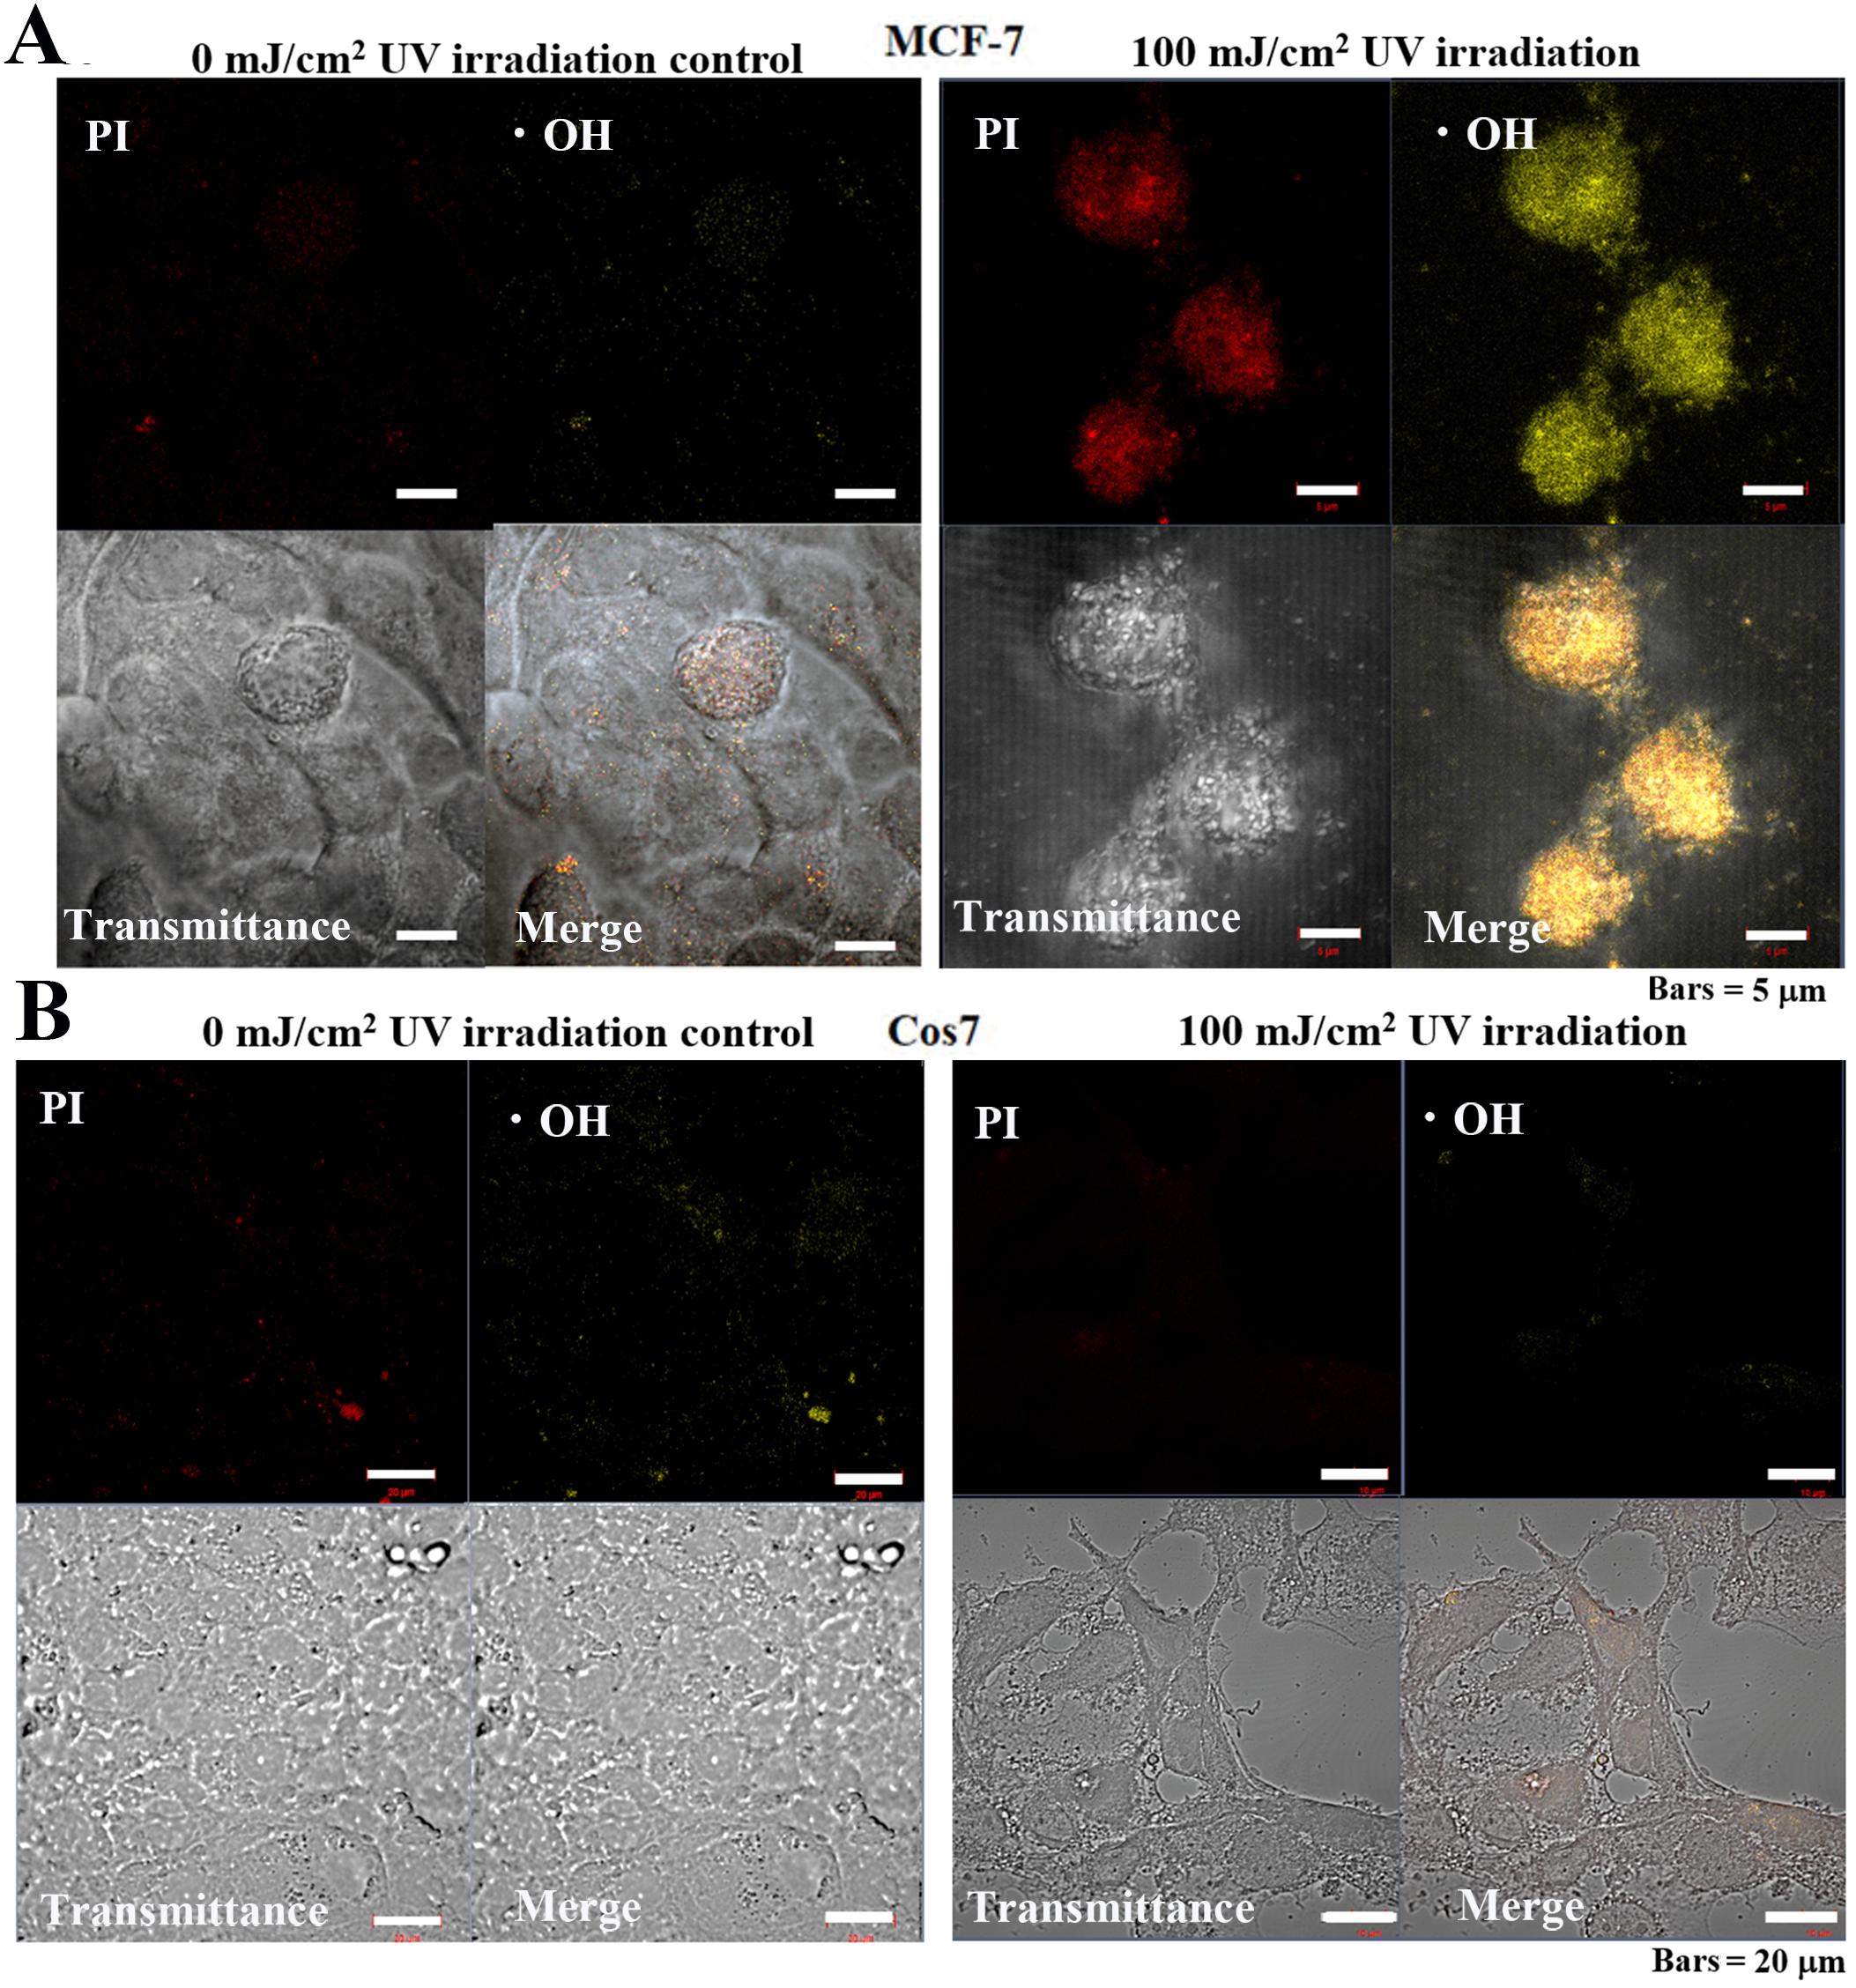 Cellular mitochondrial ROS-OH580 activity under 24 h pulsed UV irradiation in MCF-7 and Cos7 cells. (A) The signal intensities of PI and ROS-OH580 in control MCF-7 cells were weakly distributed in the cytoplasm and nucleus. Bar = 5 μm. Cell atrophy and cytoplasmic lysis were observed in irradiated MCF-7 cells. Most cells were PI-positive (cell death), and the ROS-OH580 (•OH) signal was strongly detected in the nuclear enrichment. Bar = 5μm. (B) PI and ROS-OH580 (•OH) signal intensities in Cos7 cells were weakly distributed in the cytoplasm of control and irradiated Cos7 cells. Bar = 5μm. Source: <b>A New Drug-Free Cancer Therapy Using Ultraviolet Pulsed Irradiation. PDT (PhotoDynamic Therapy) to PPT (Pulsed Photon Therapy).</b> by Johbu Itoh, Yoshiko Itoh. <em>Front. Biosci. (Schol Ed)</em>, Sept. 2022.